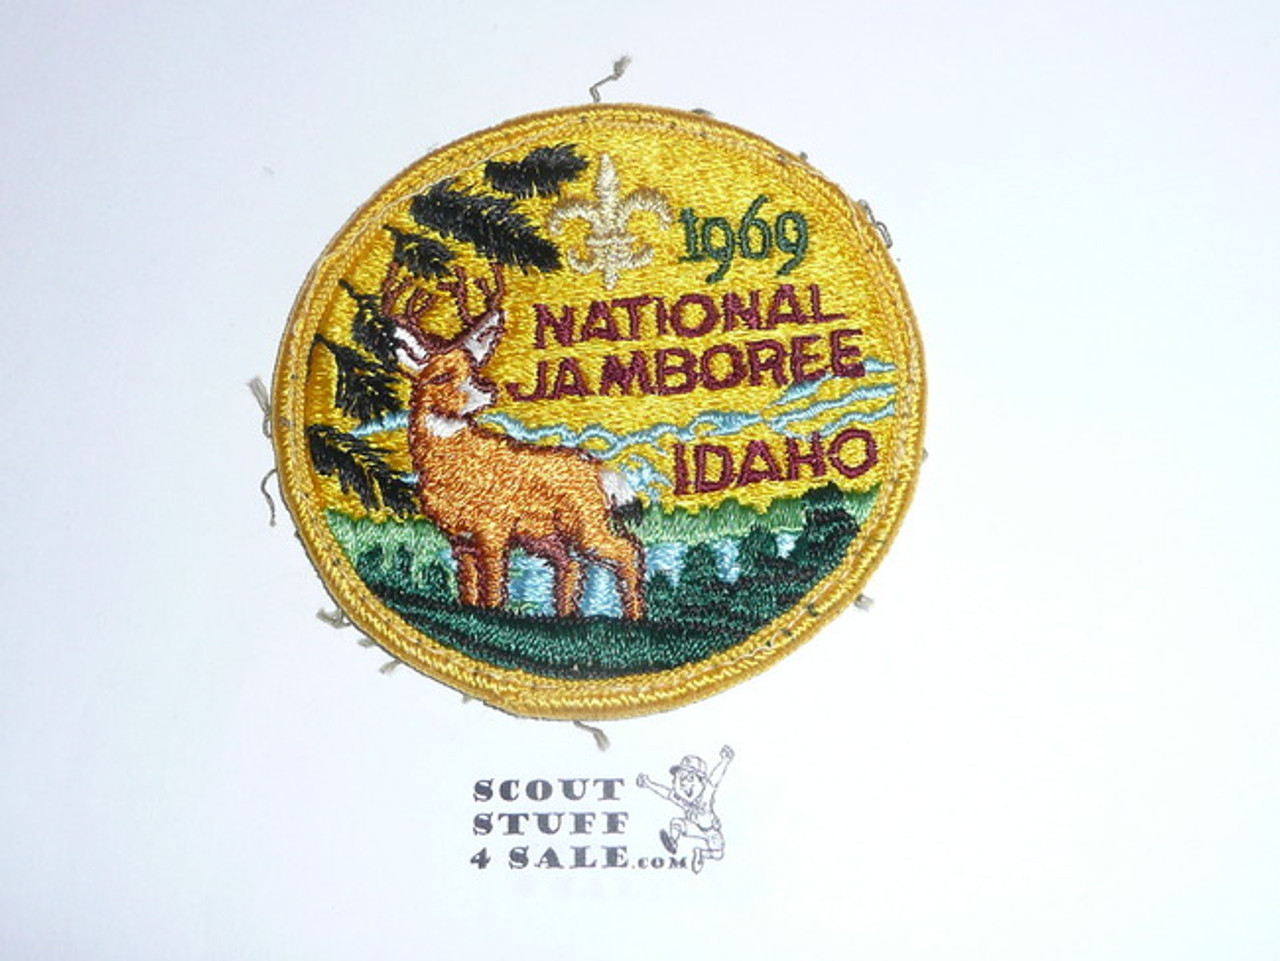 1969 National Jamboree Patch, used